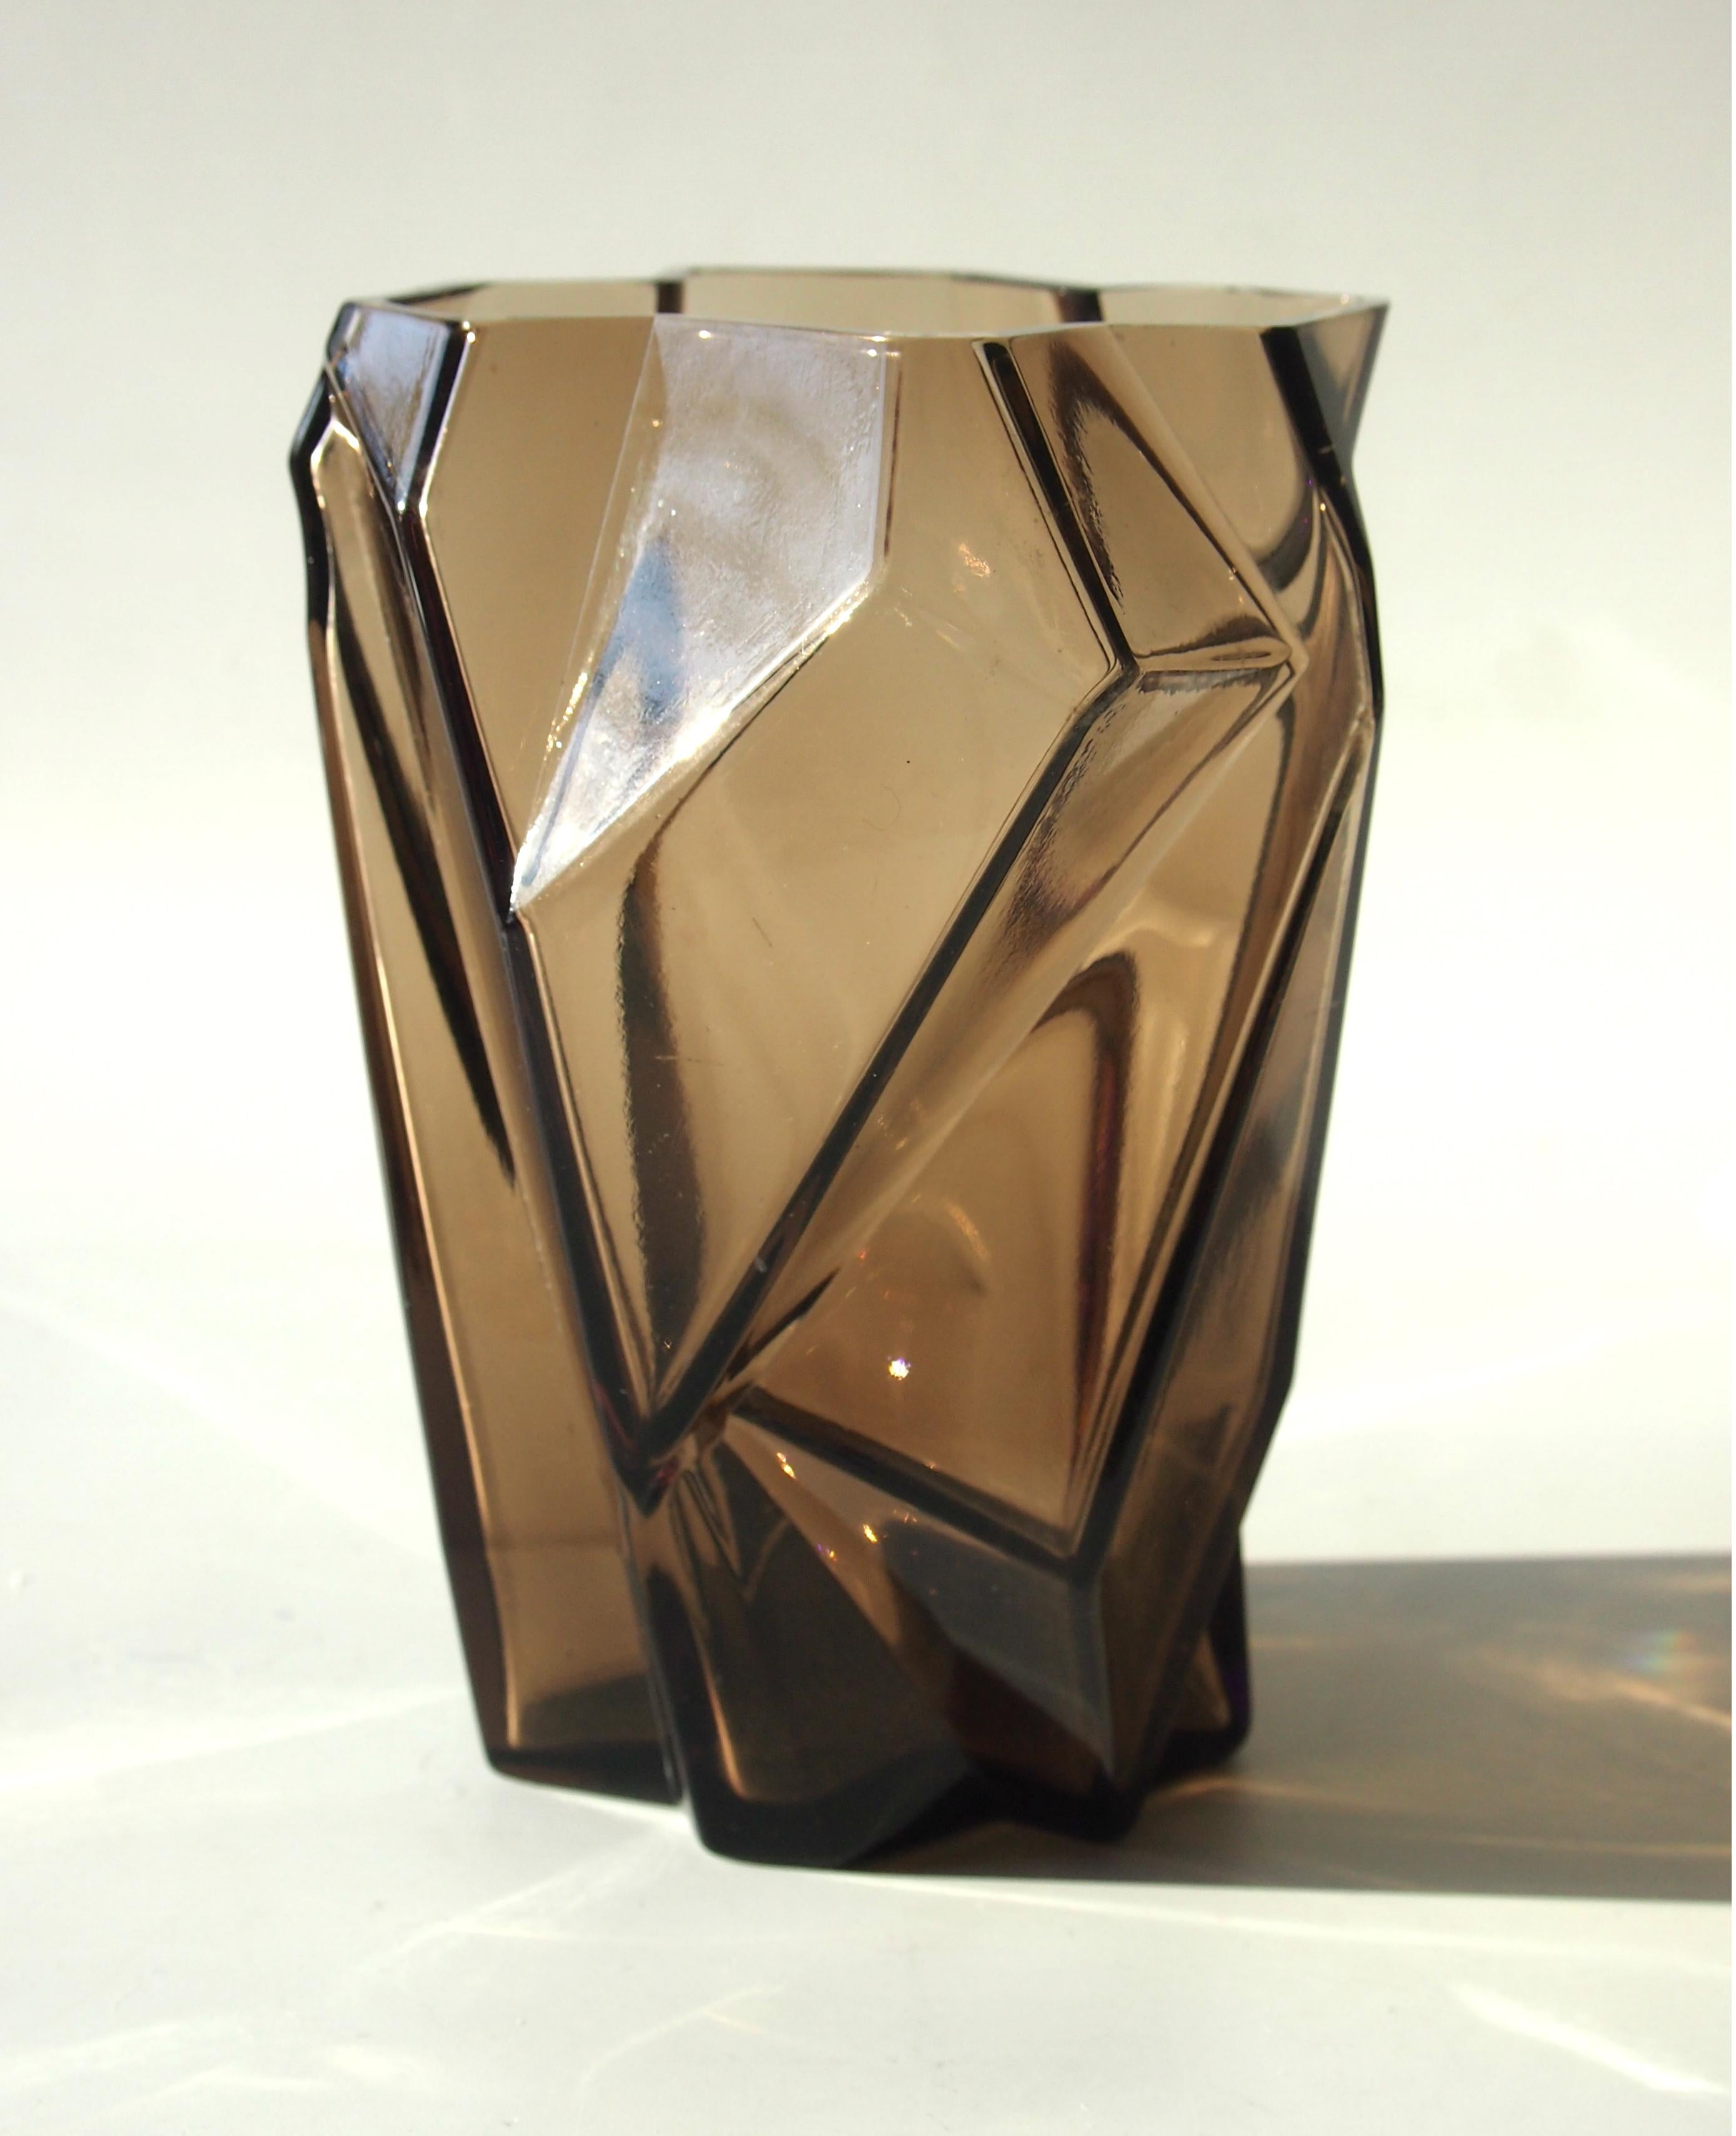 American Topaz Ruba Rombic Art Deco Cubist Glass Vase Made by Consolidated